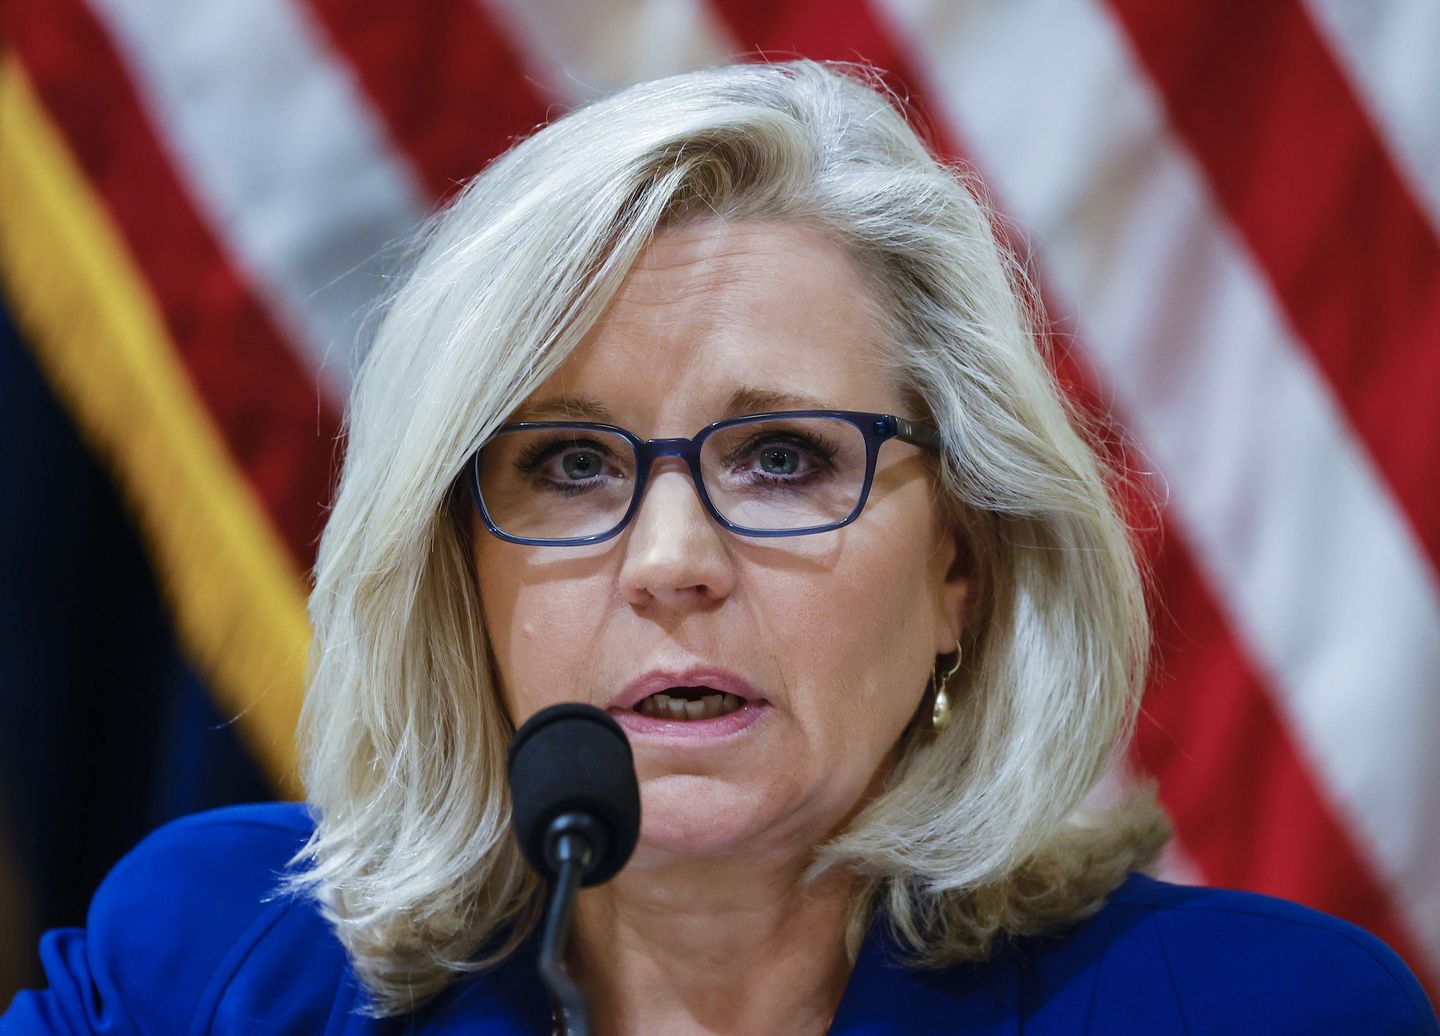 Liz Cheney says she was wrong to oppose gay marriage